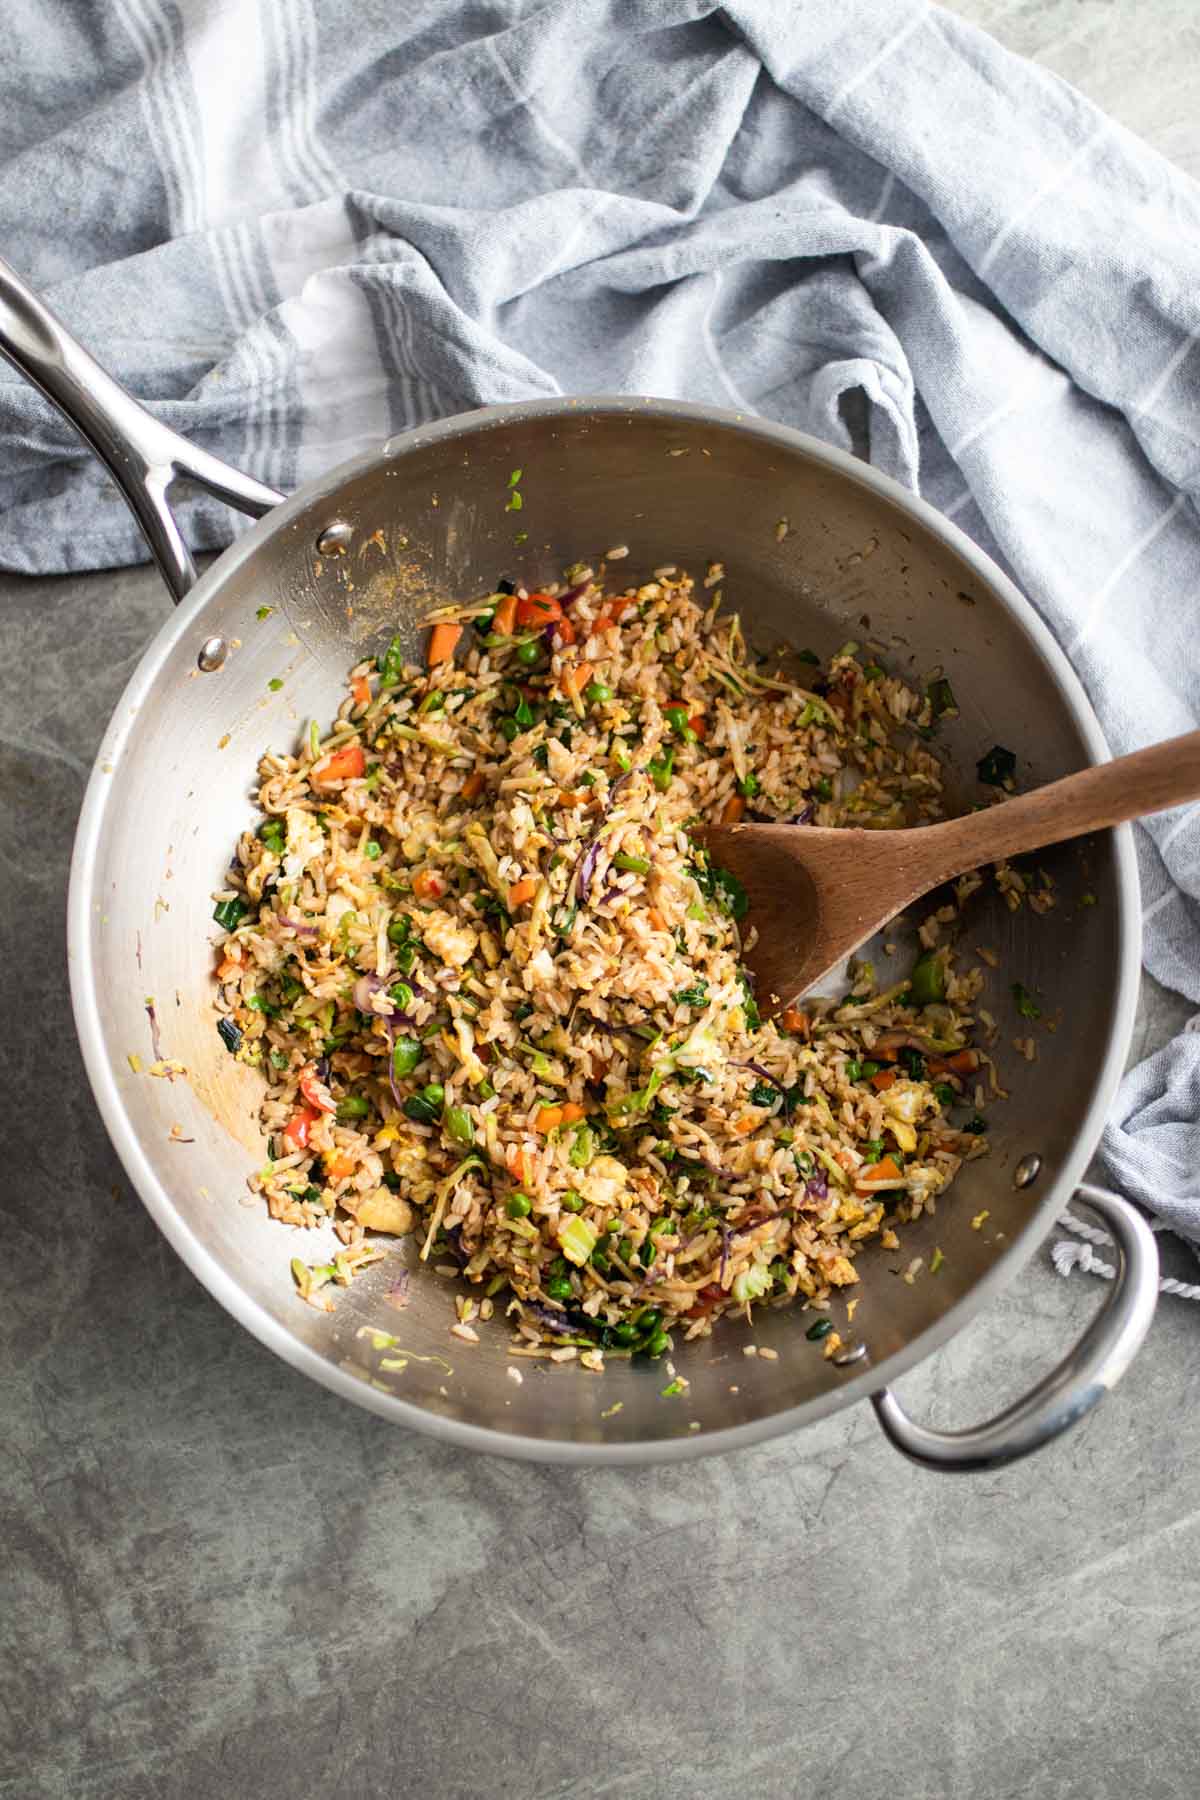 Fried rice with vegetables in a pan.